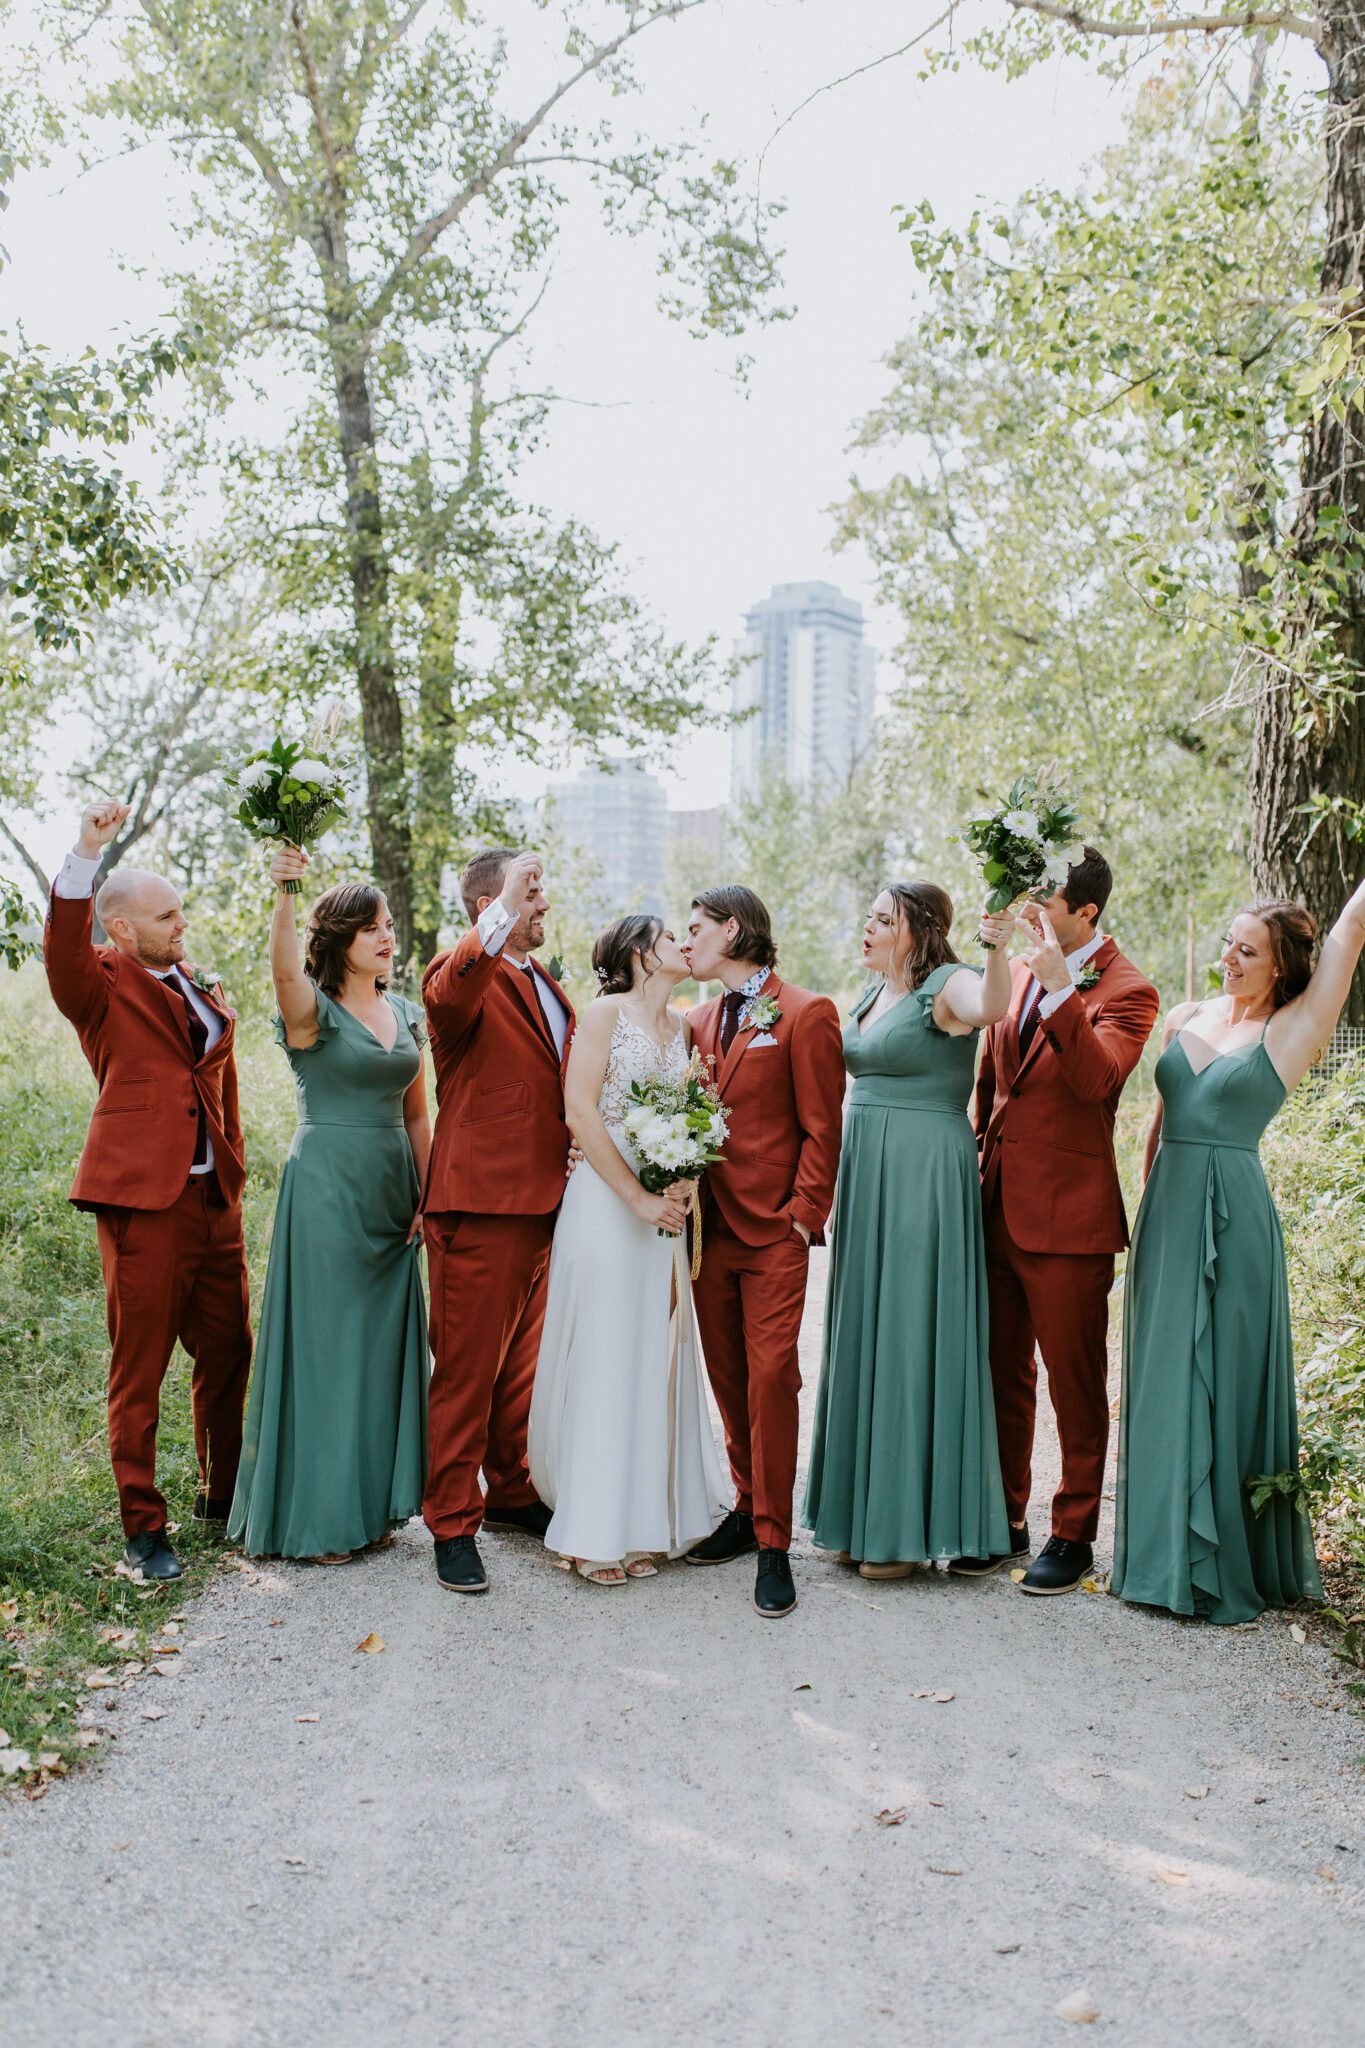 outdoor wedding party portraits, rust and terracotta suits and sage bridesmaids dresses for this fall wedding attire